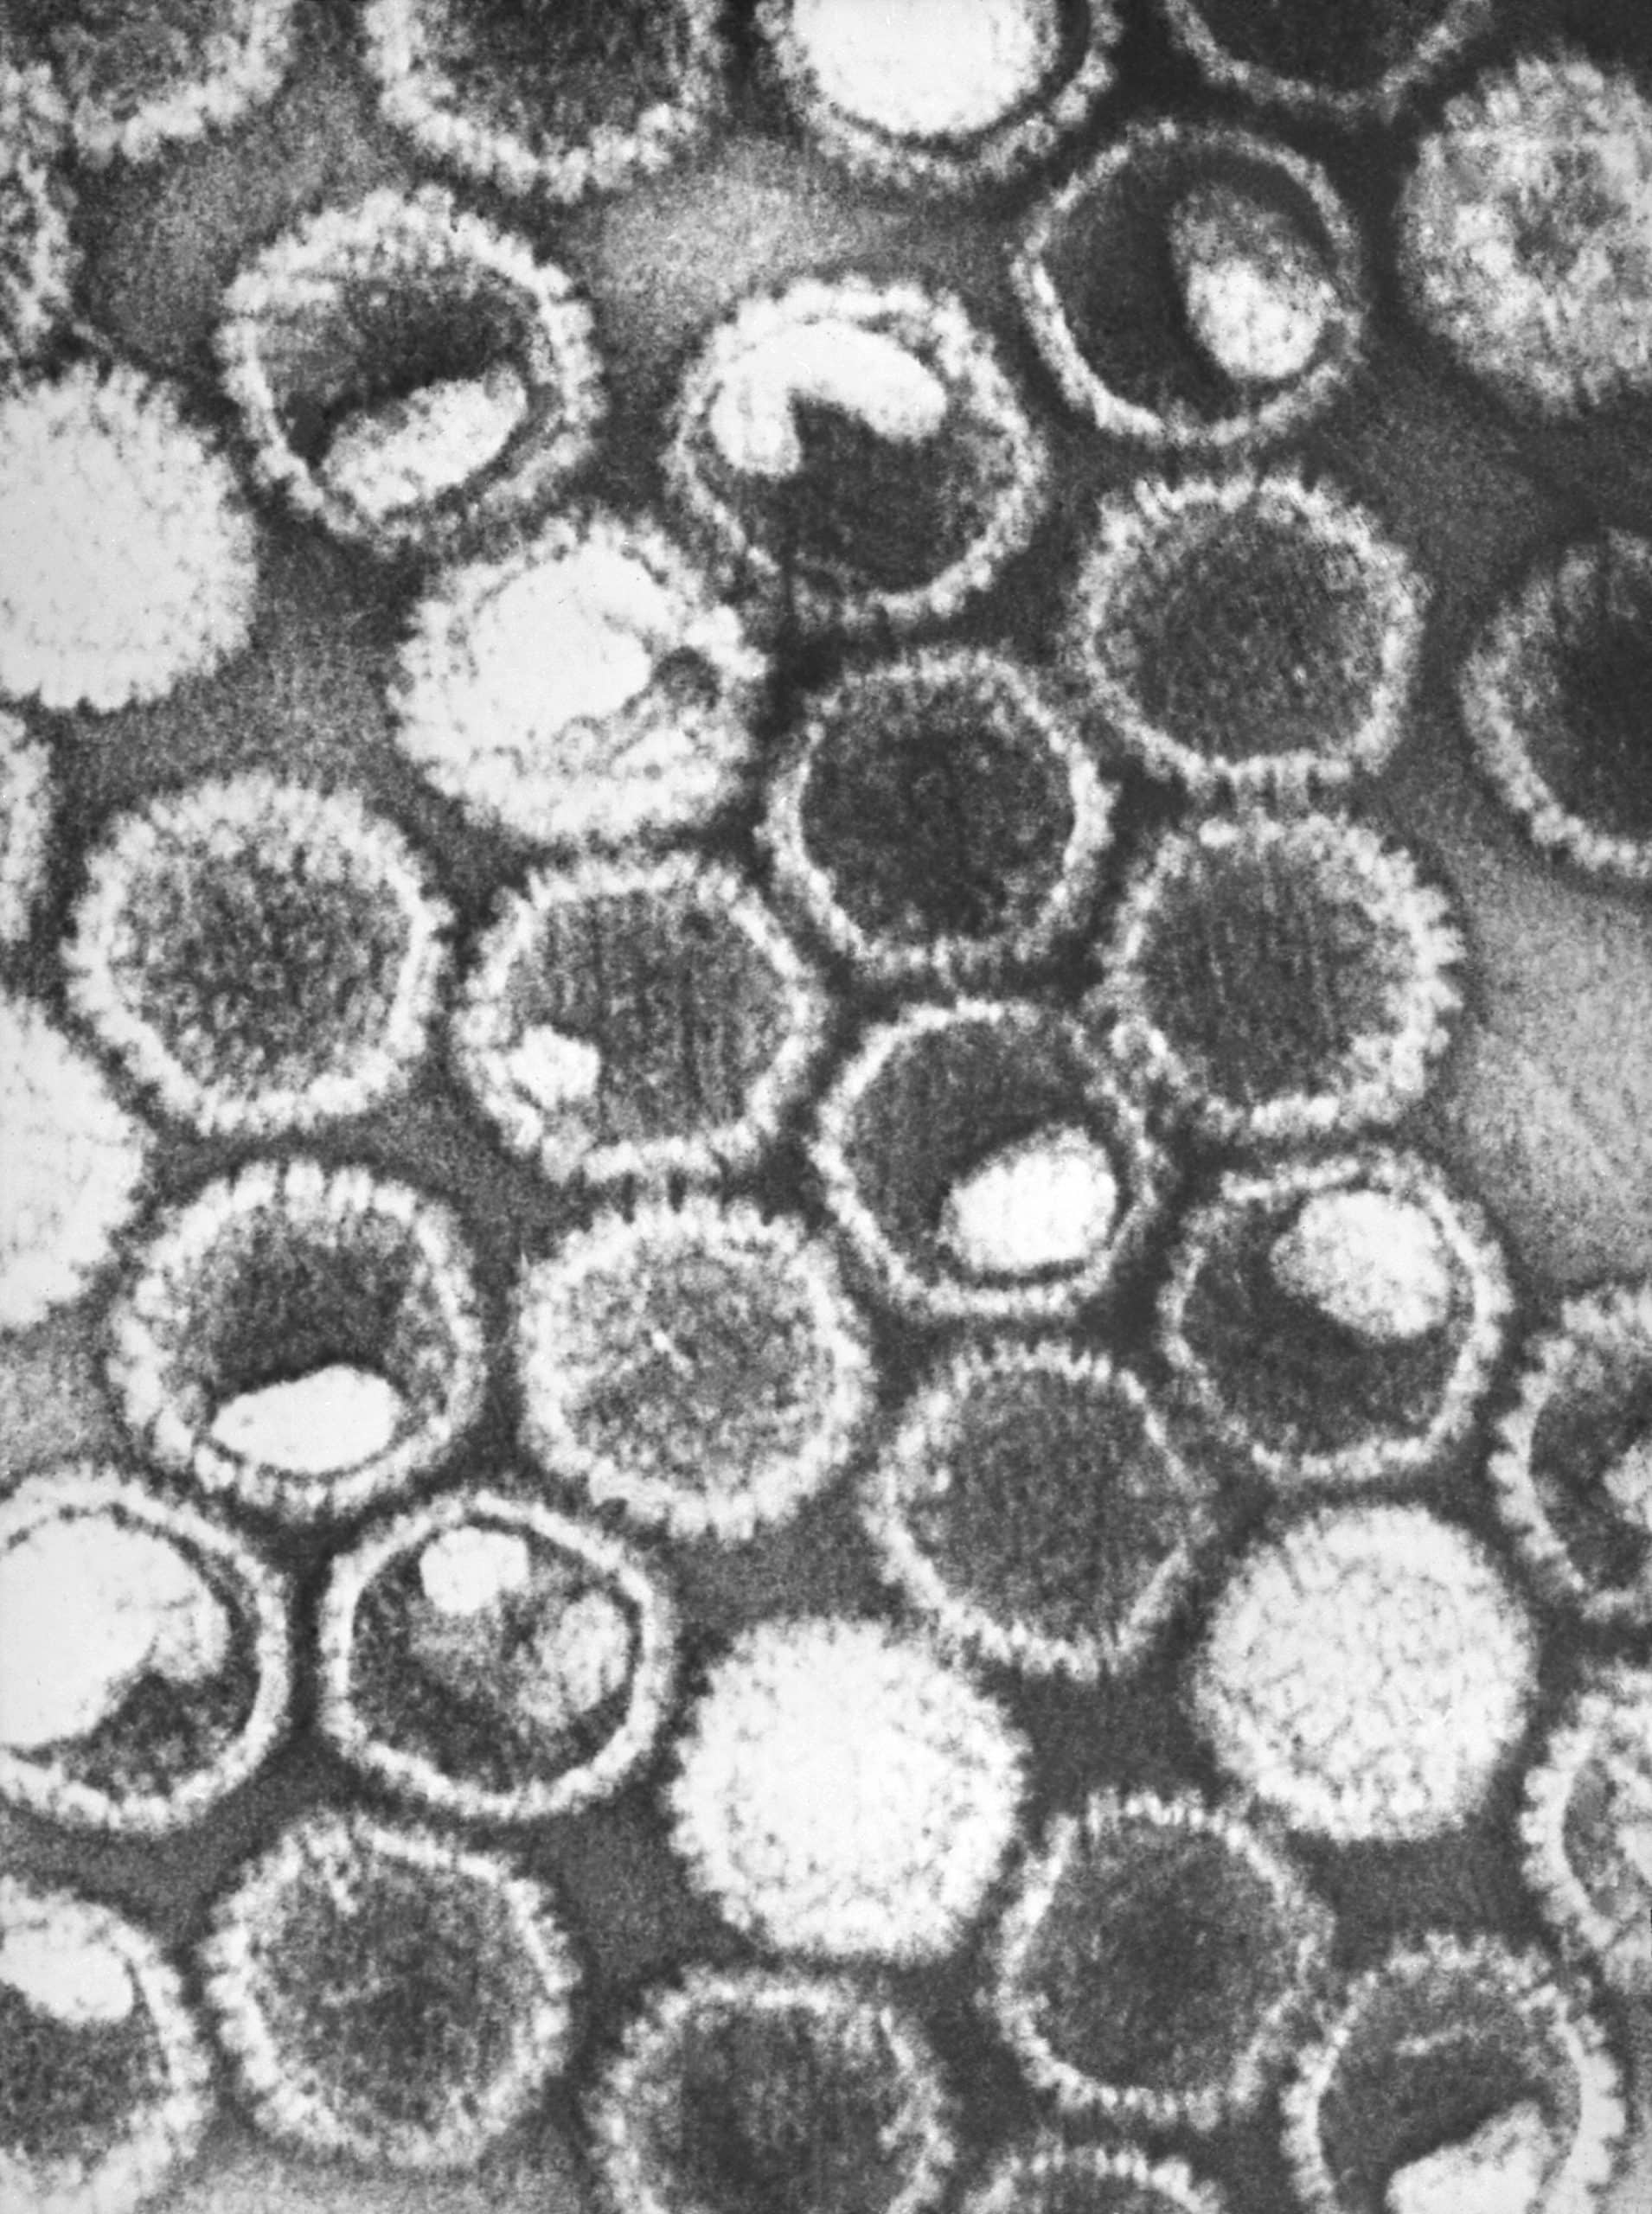 Electron micrograph of herpes simplex virus